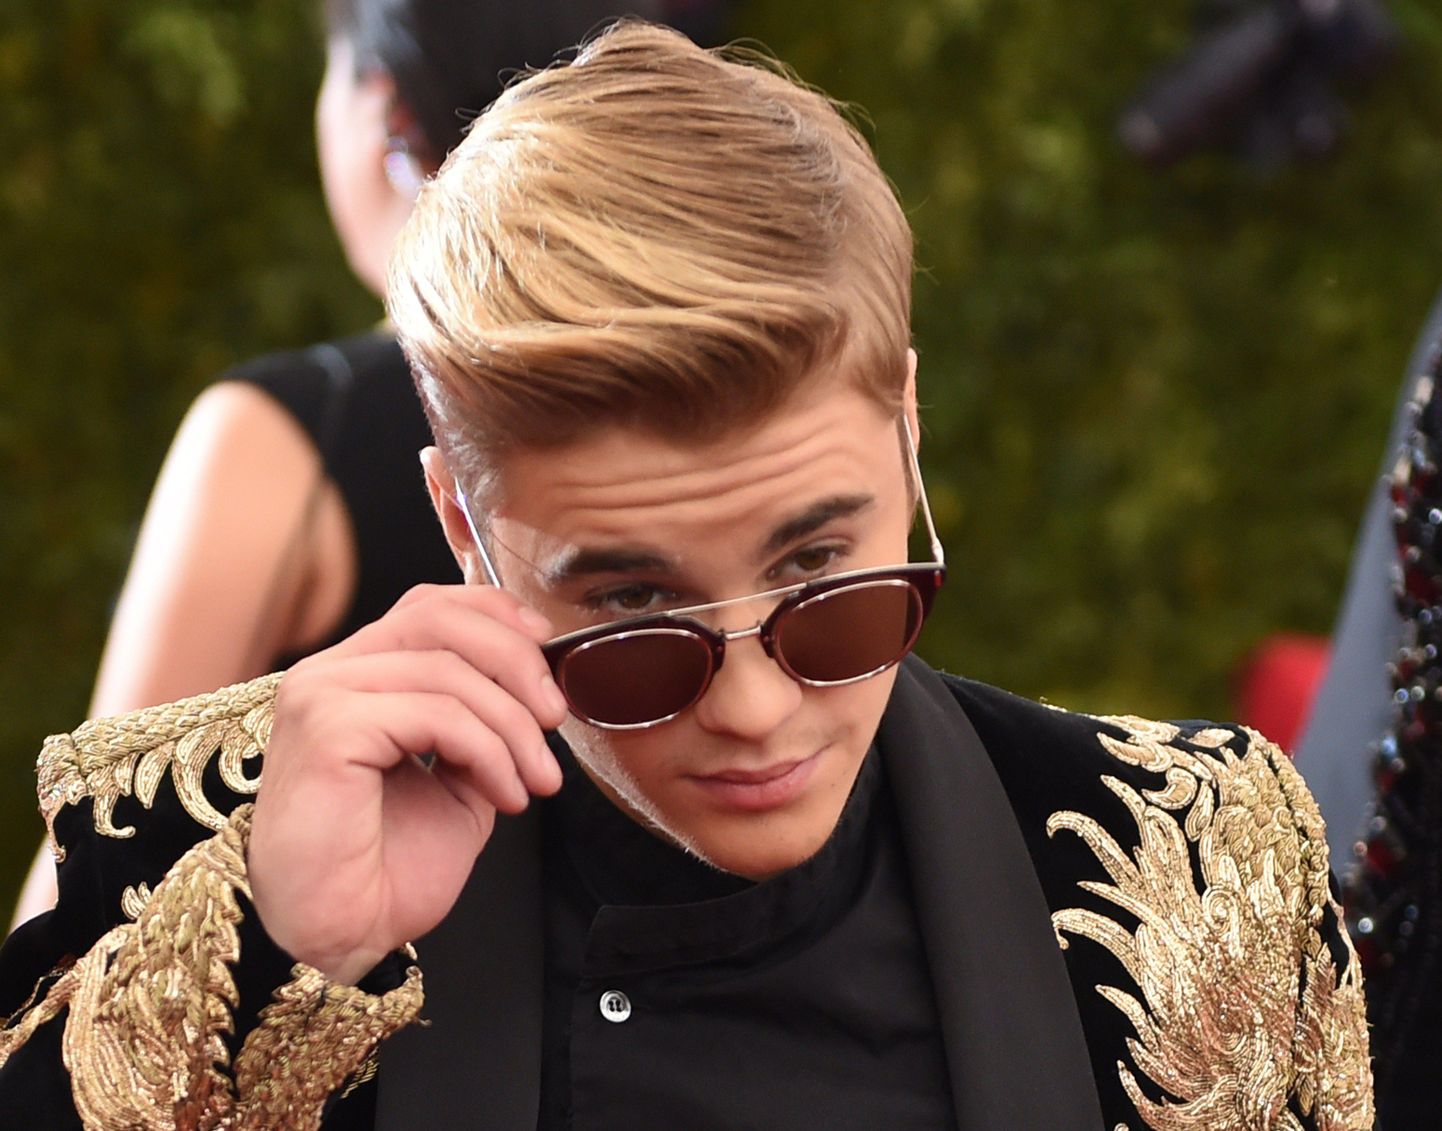 Justin Bieber arrives at the Costume Institute Gala Benefit at The Metropolitan Museum of Art May 5, 2015 in New York.  AFP PHOTO / TIMOTHY A. CLARY